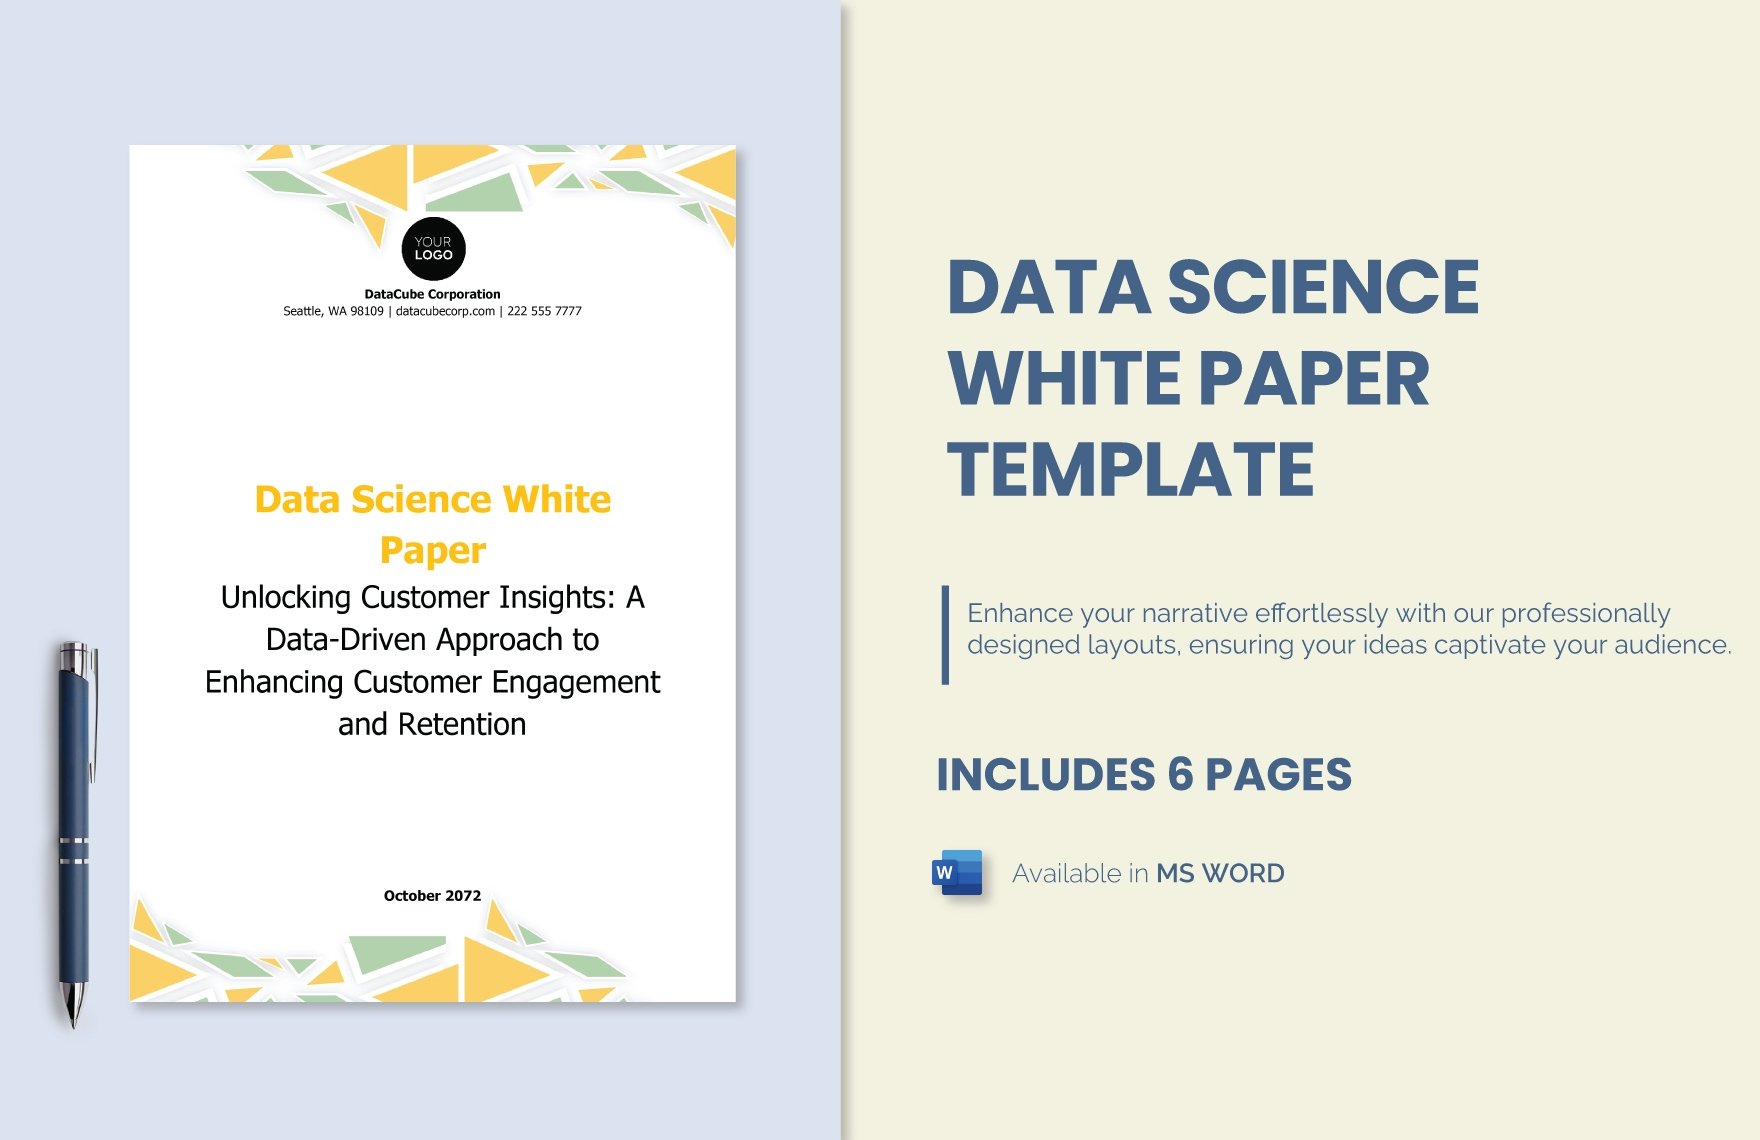 Data science White Paper Template